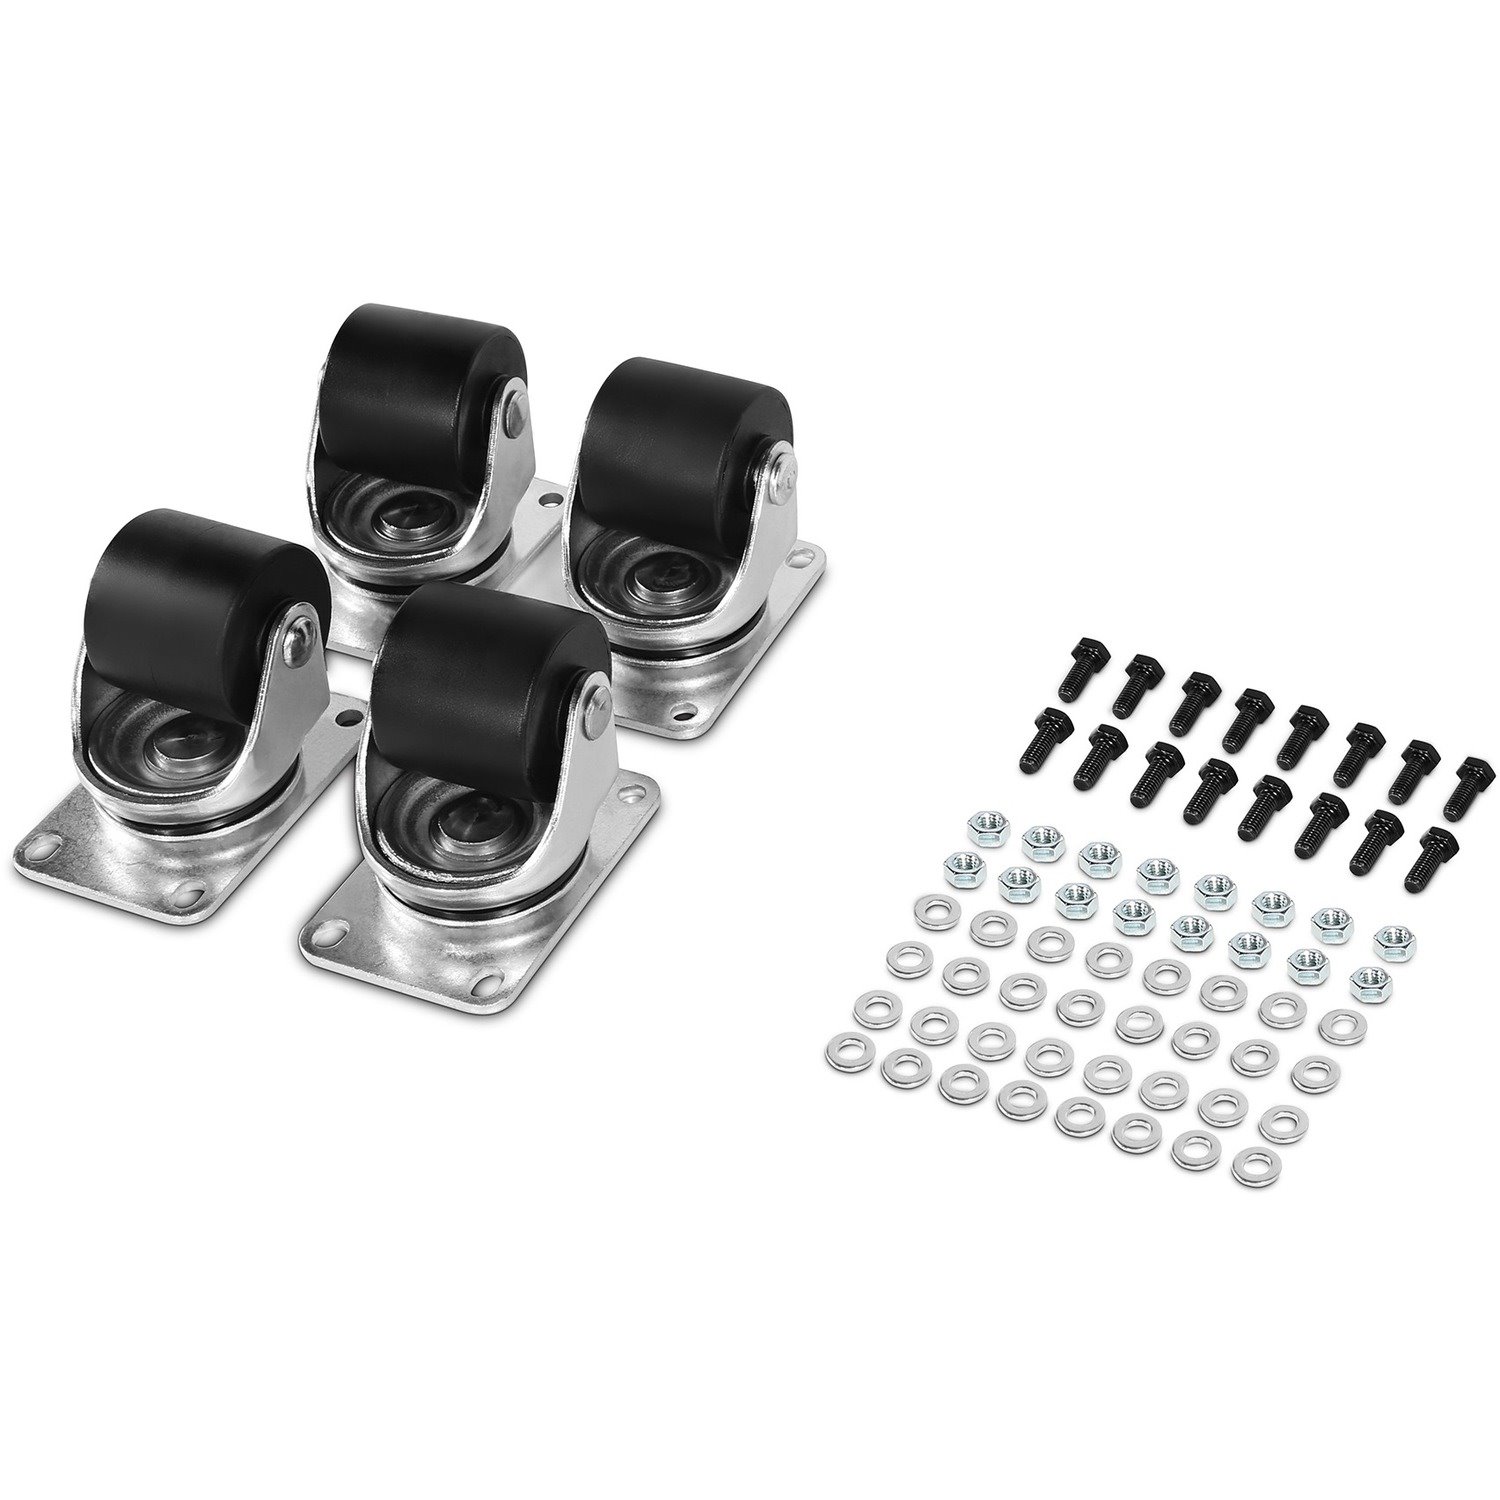 CyberPower Carbon Rack Caster Kit - Silver, Black